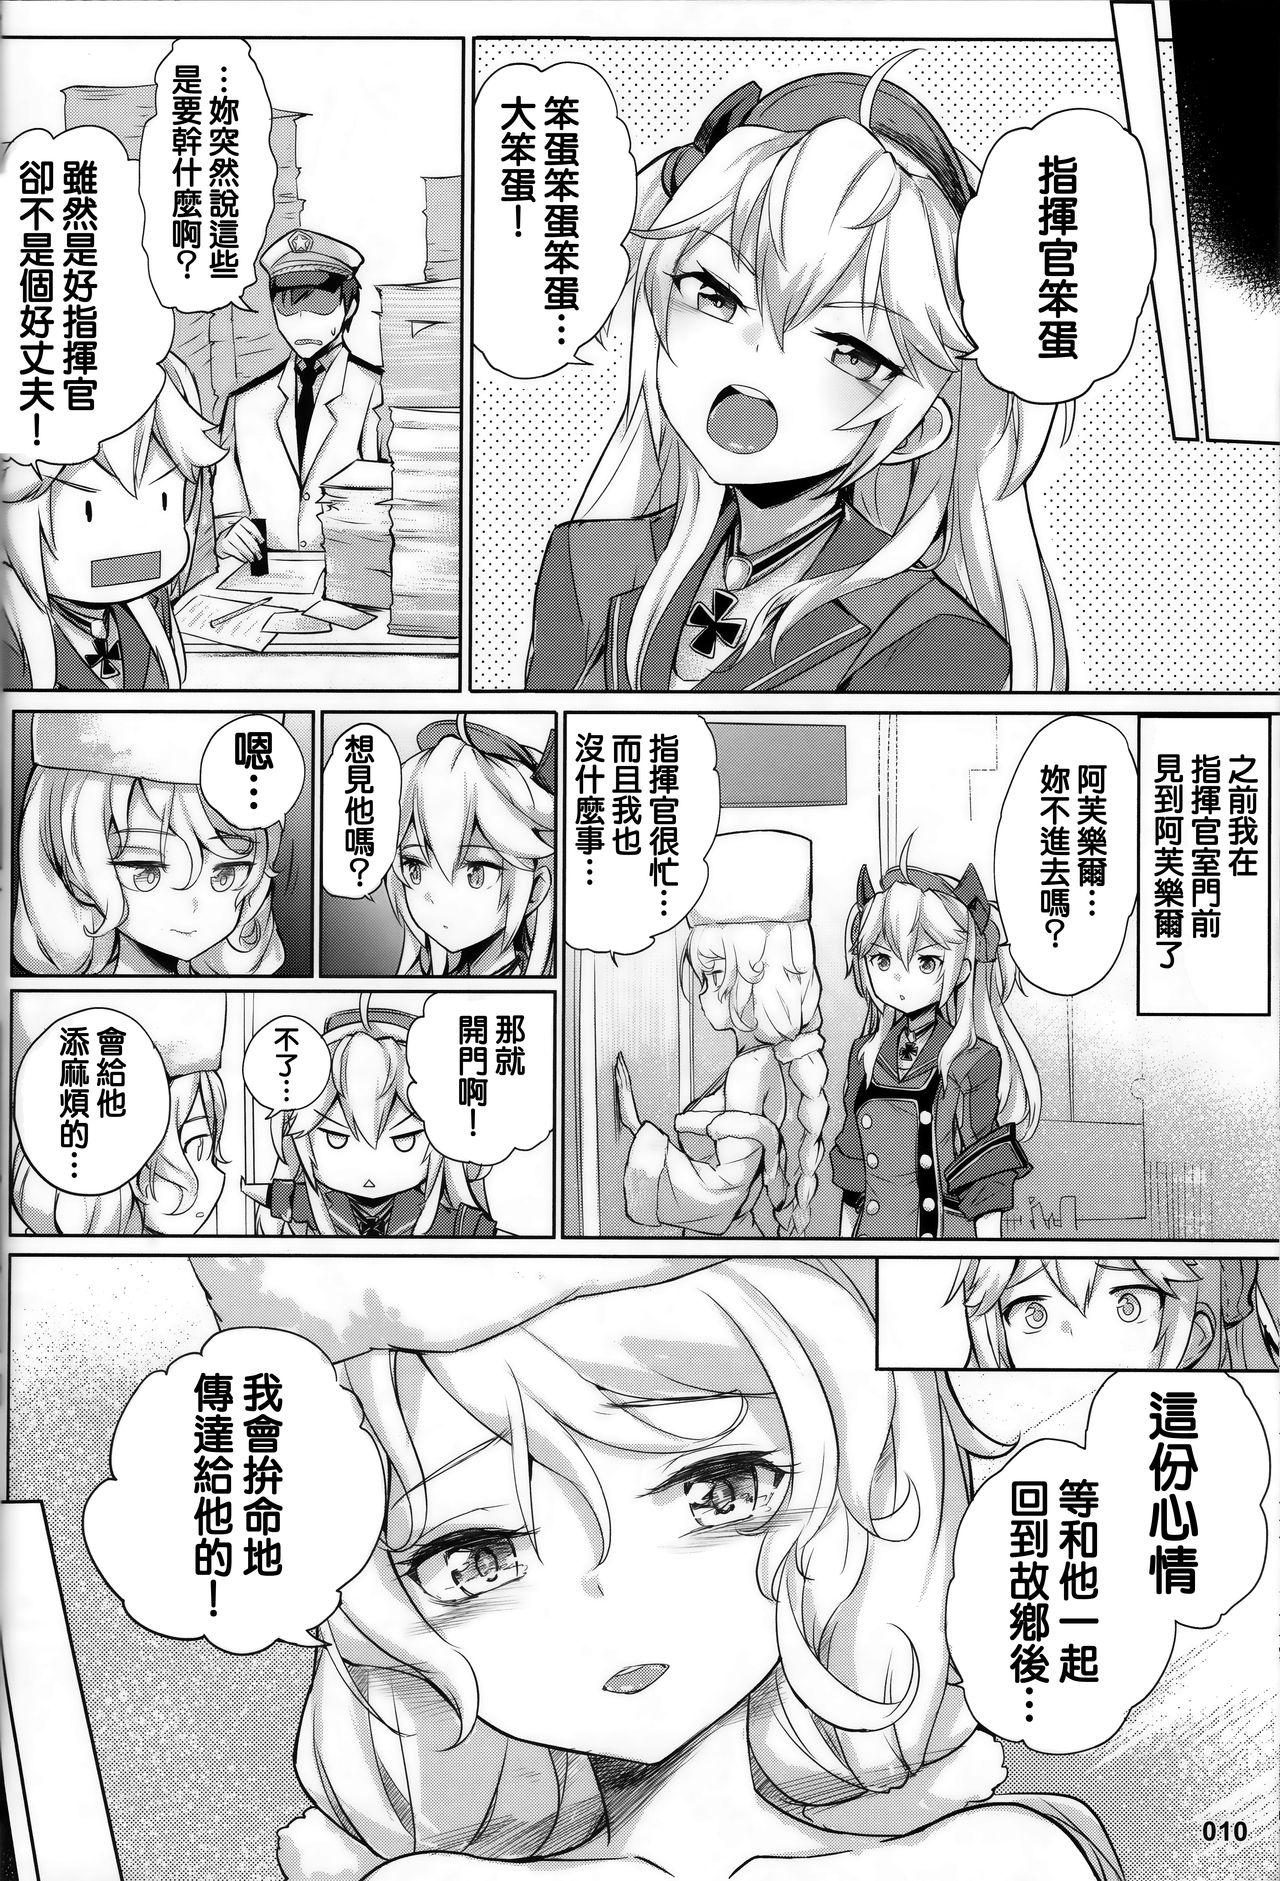 18 Year Old Avrora no Oyome-san Project - Azur lane Cums - Page 12